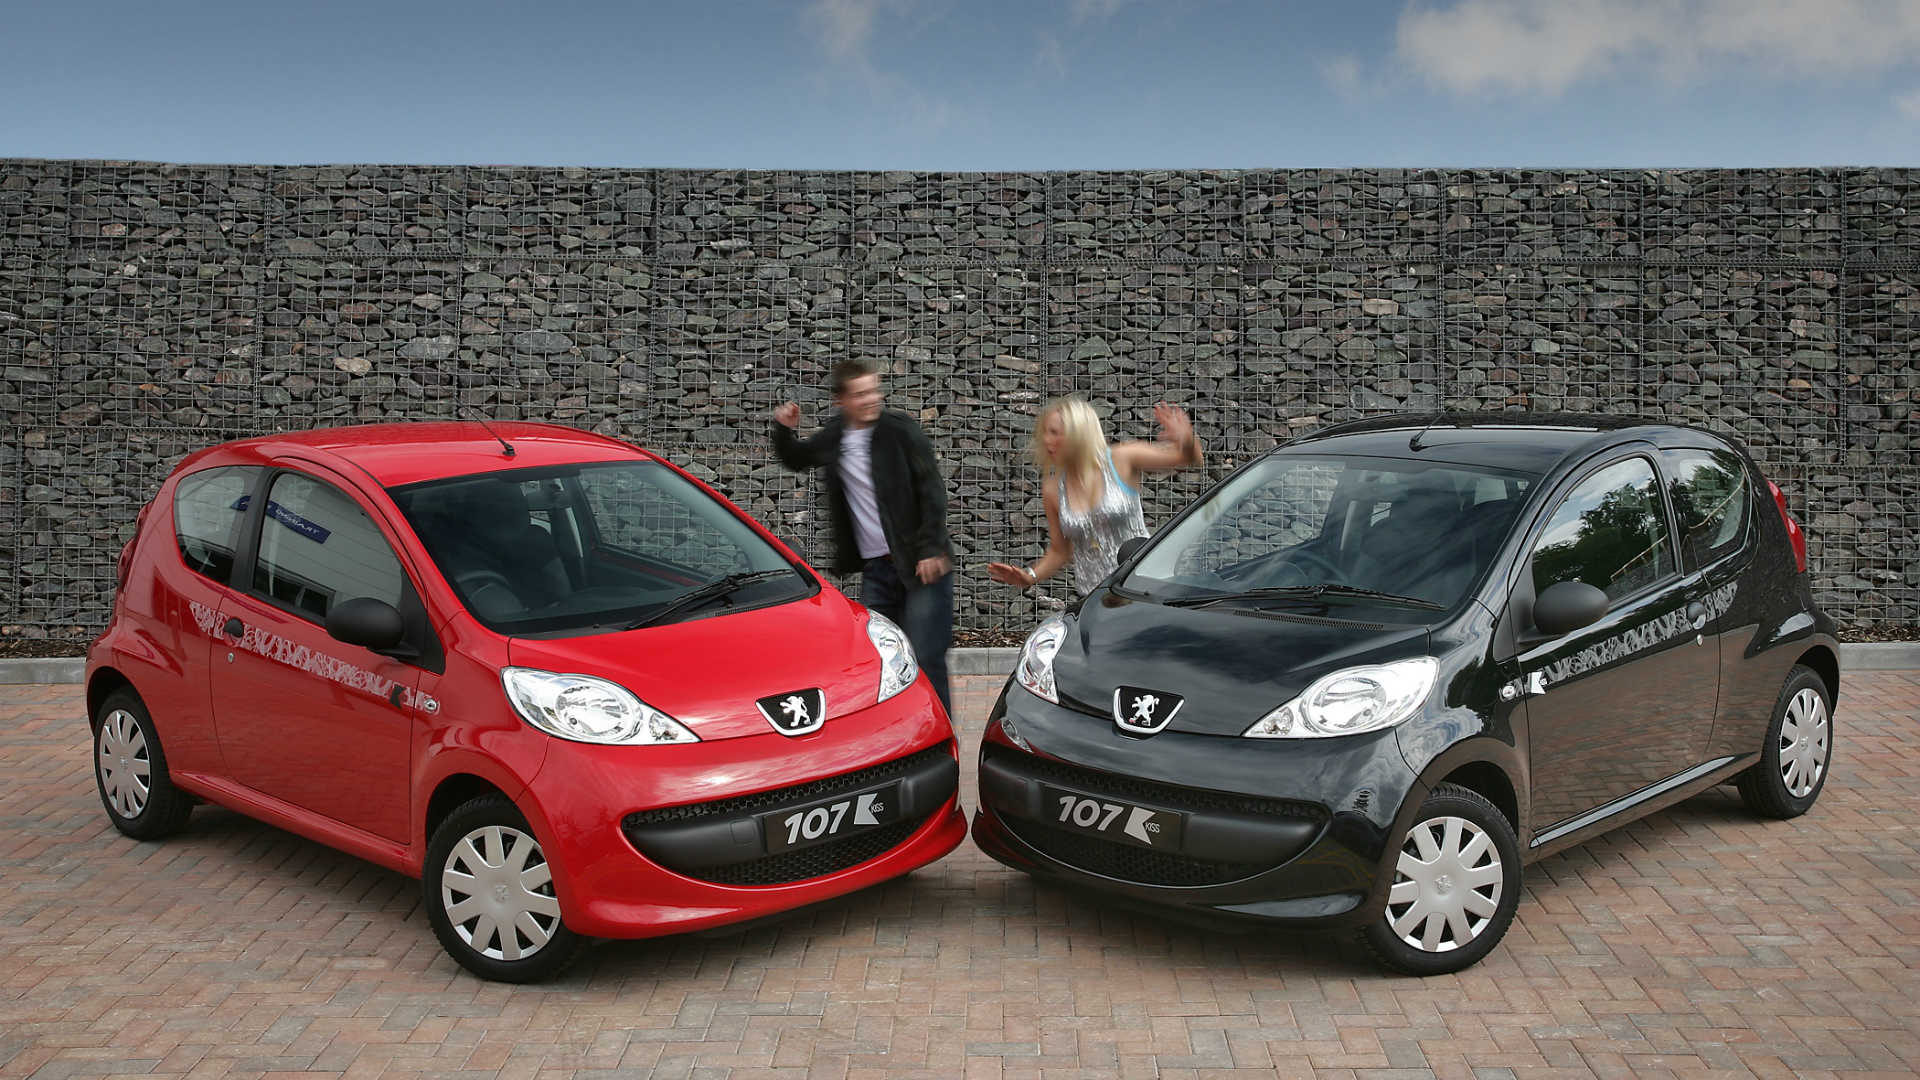 The 10 Cheapest Cars For 17 Year Olds To Insure Motoring intended for measurements 1920 X 1080